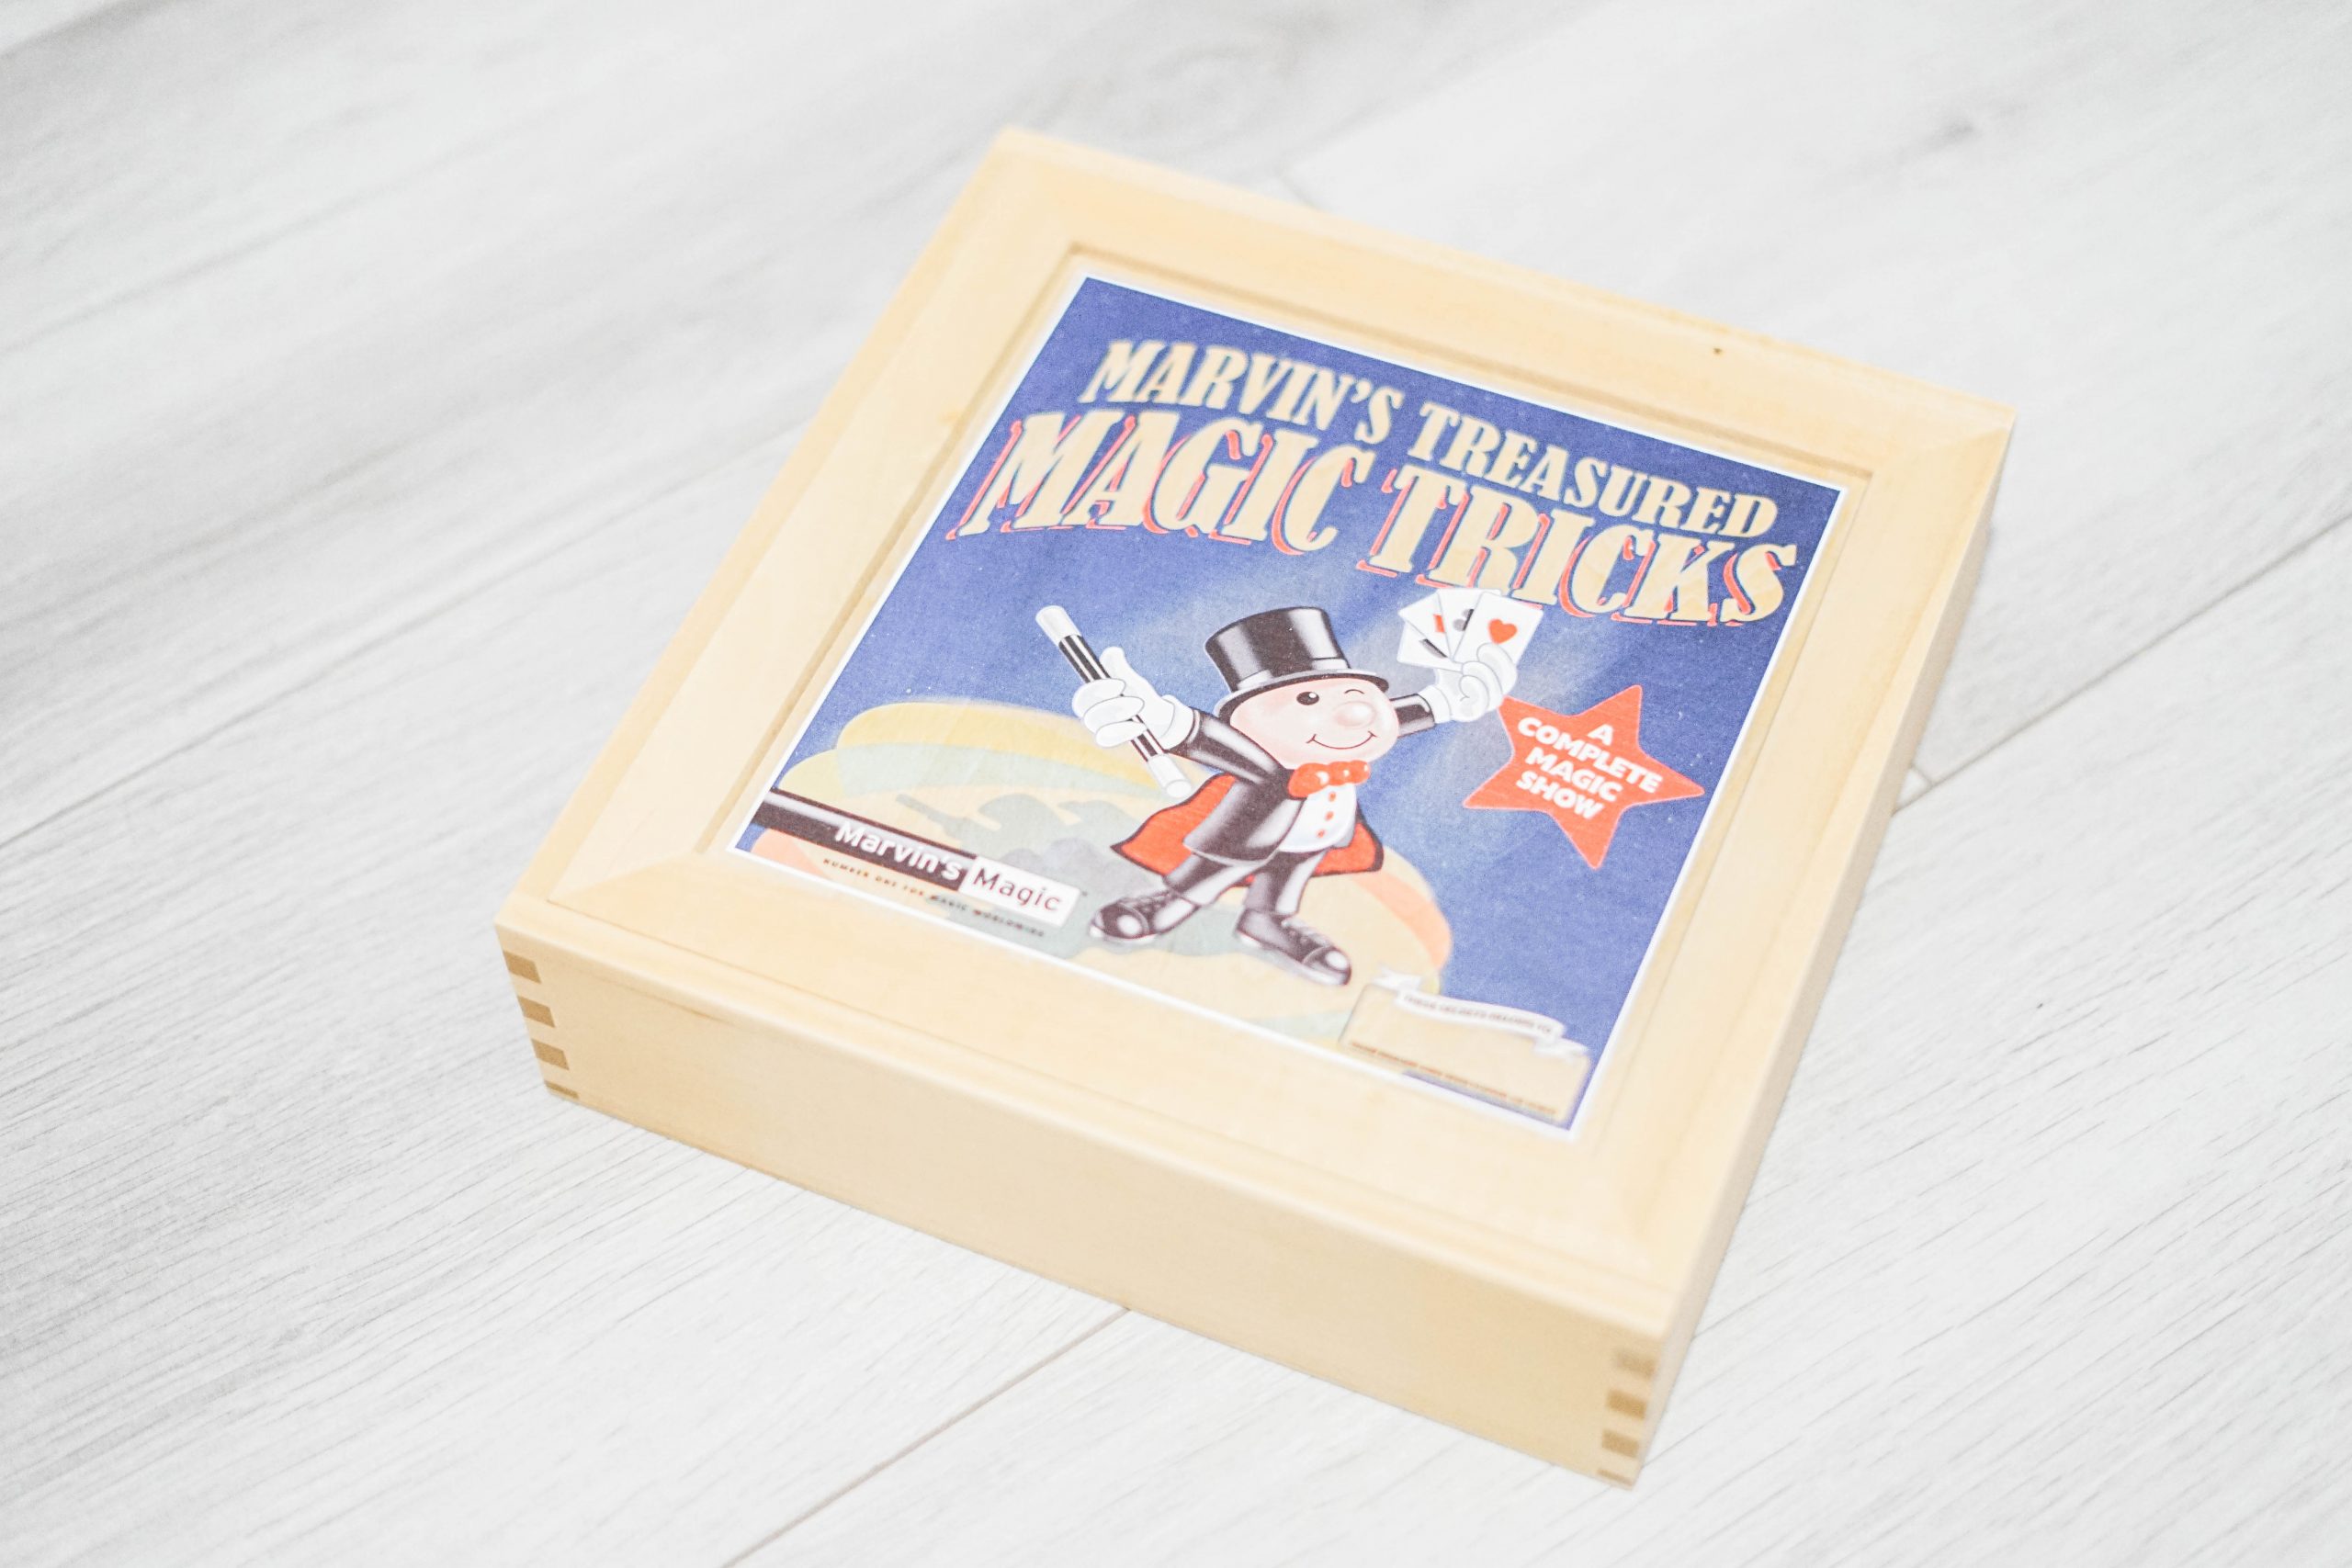 Marvin’s Magic Gift Sets